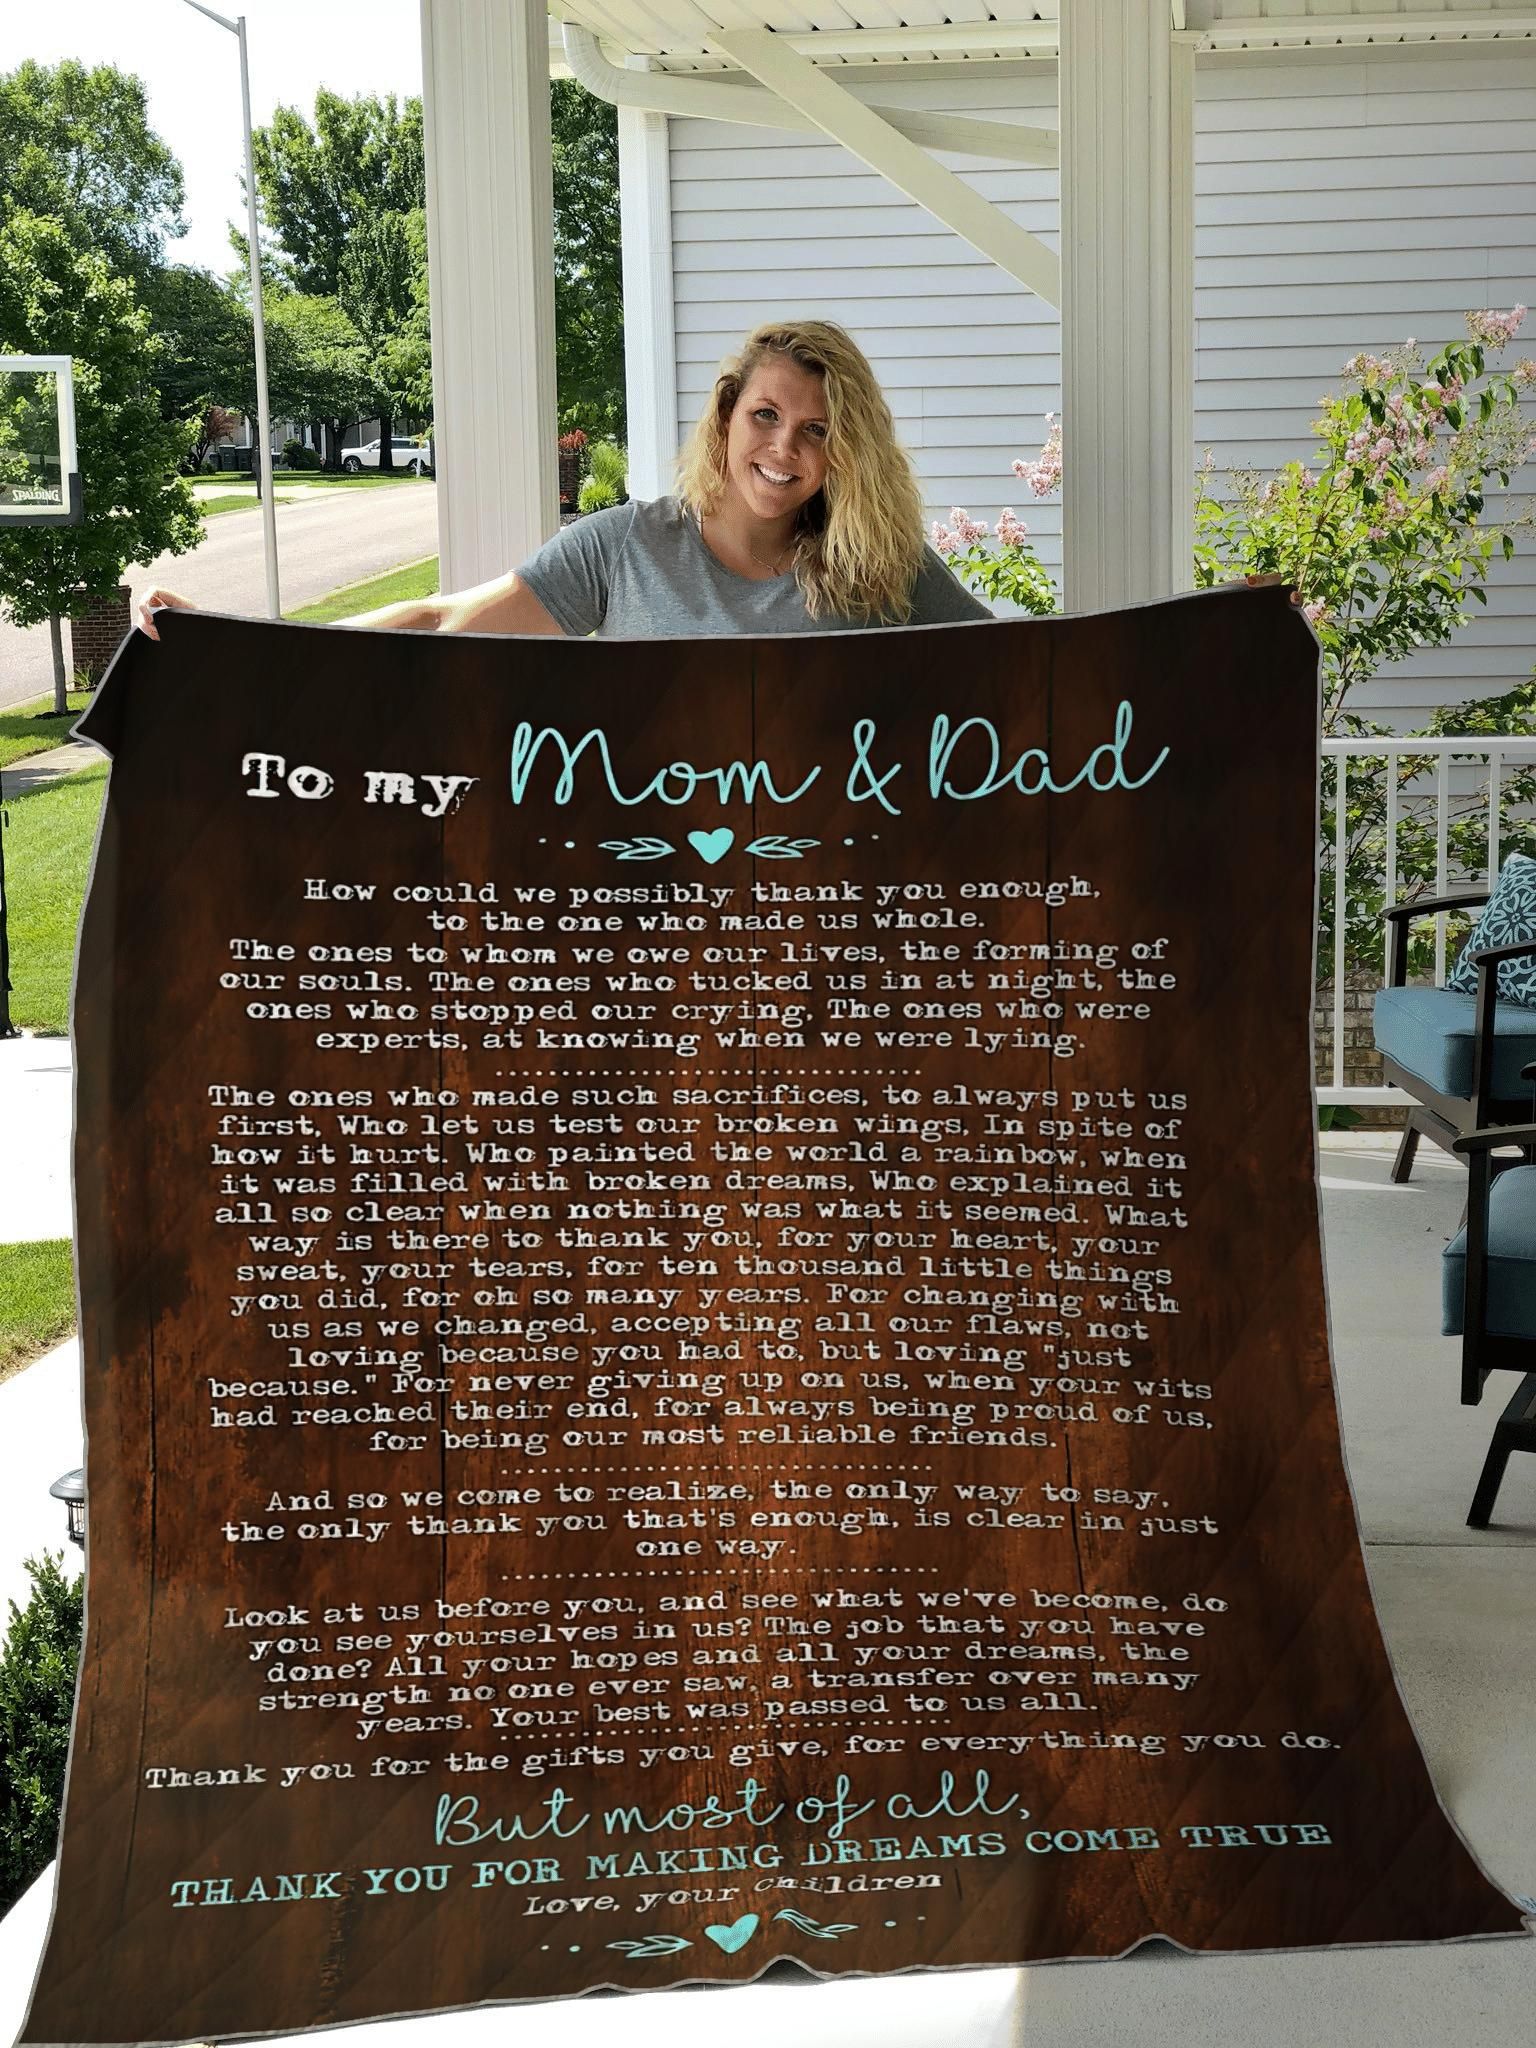 Gift To Mom And Dad From Children Thank You For Making Dreams Come True Quilt